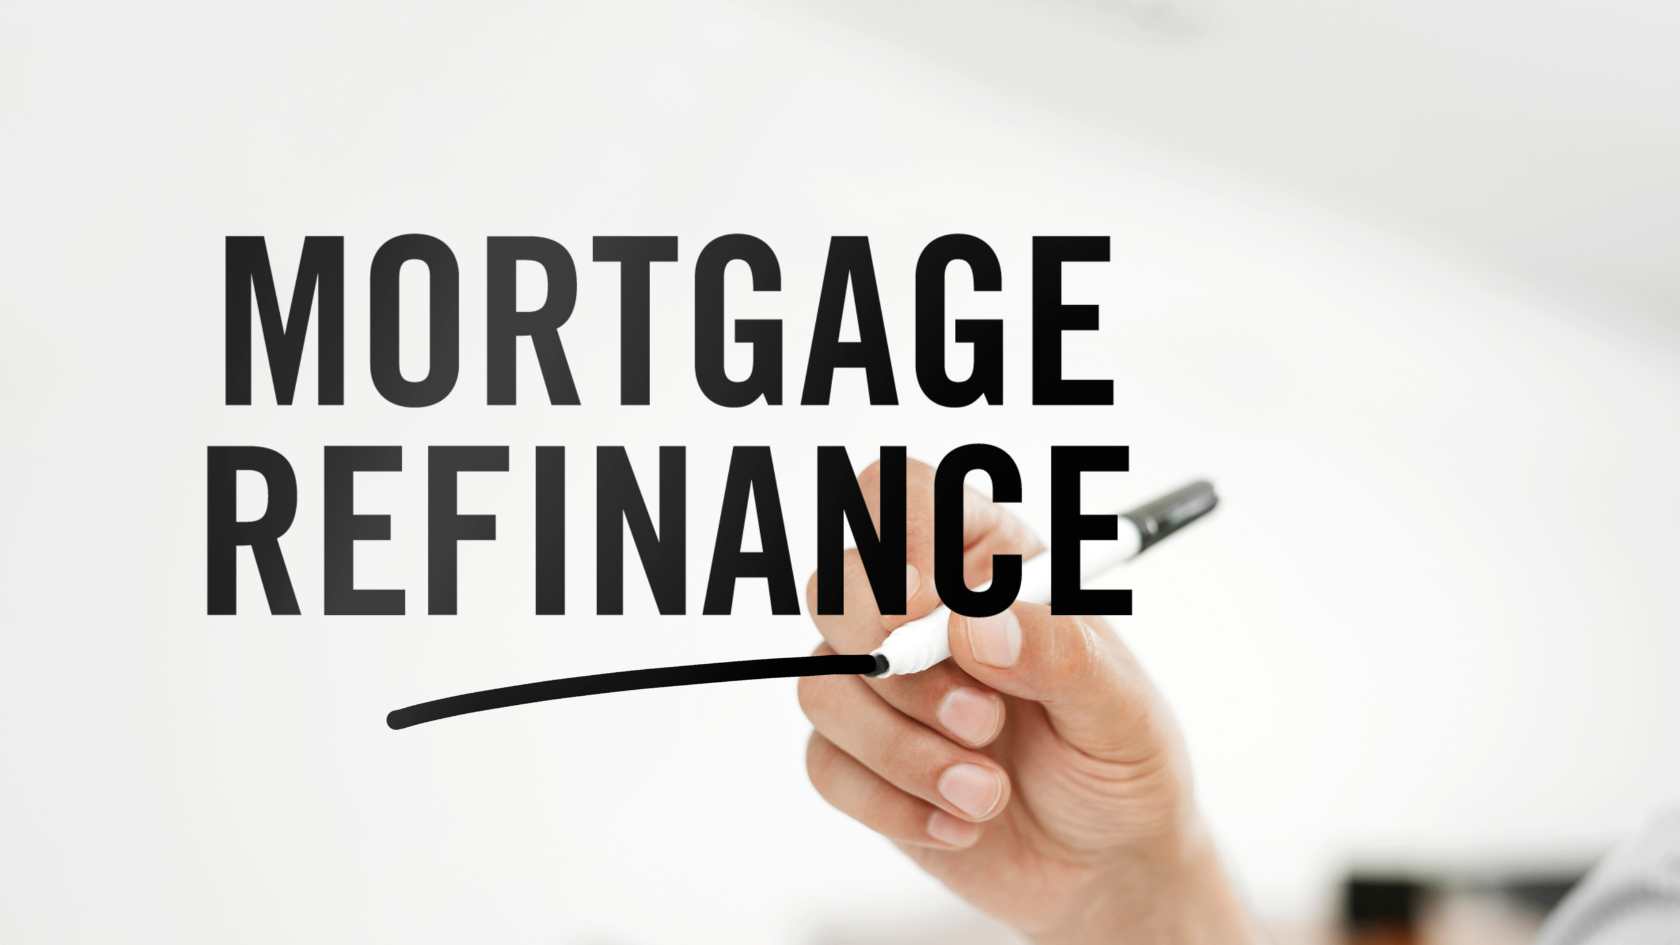 Is it time for a mortgage refinance? a hand writes mortgage refinance on a glass window